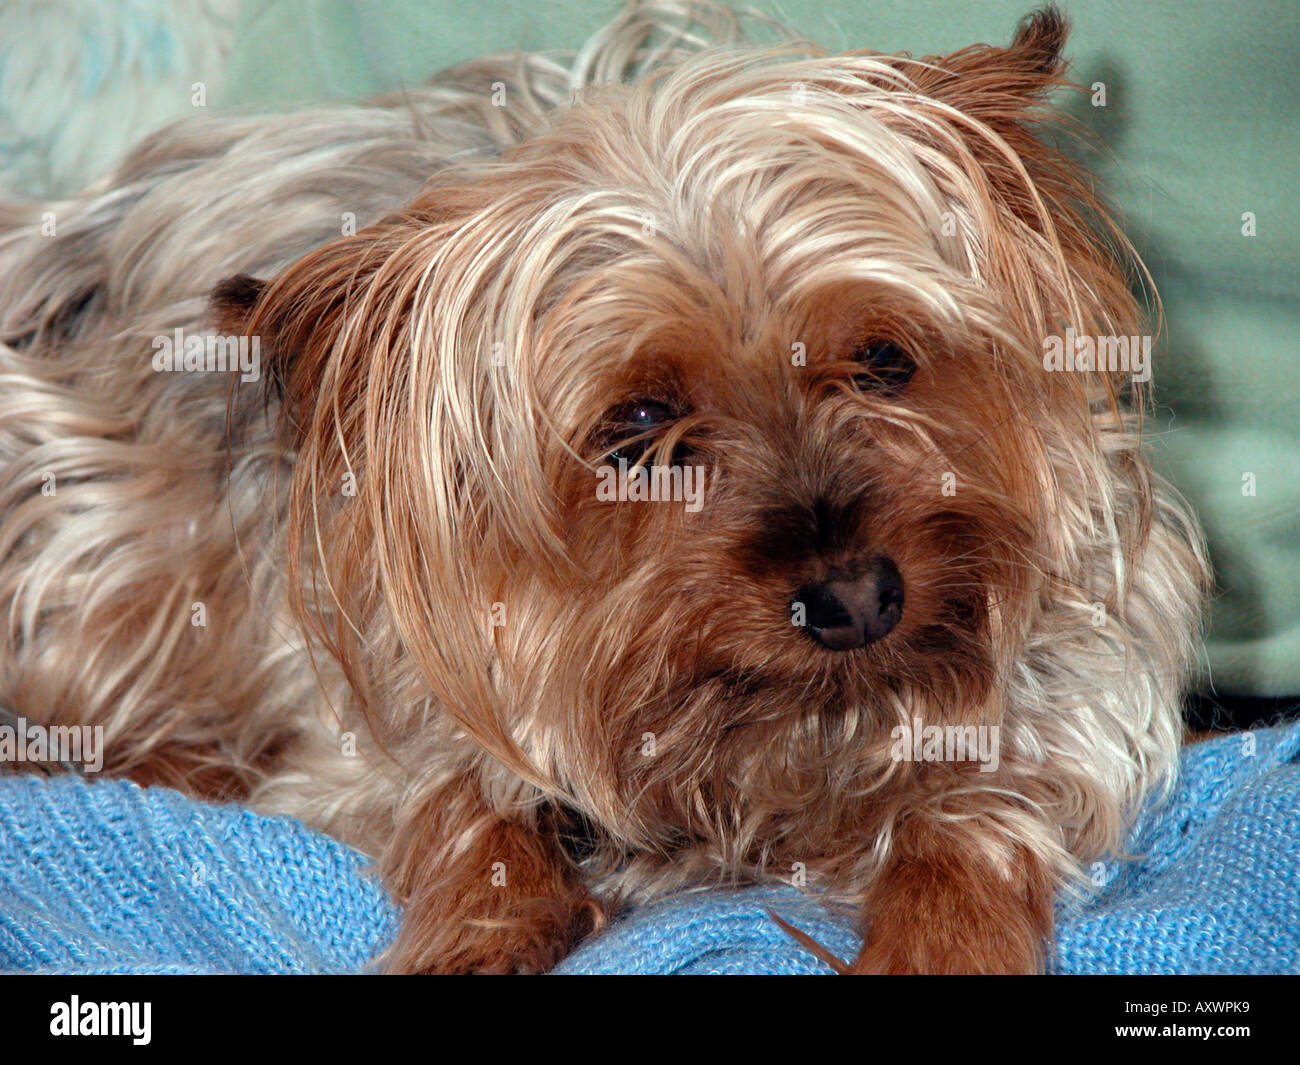 cute Yorkshire terrier dog resting on blankets Stock Photo